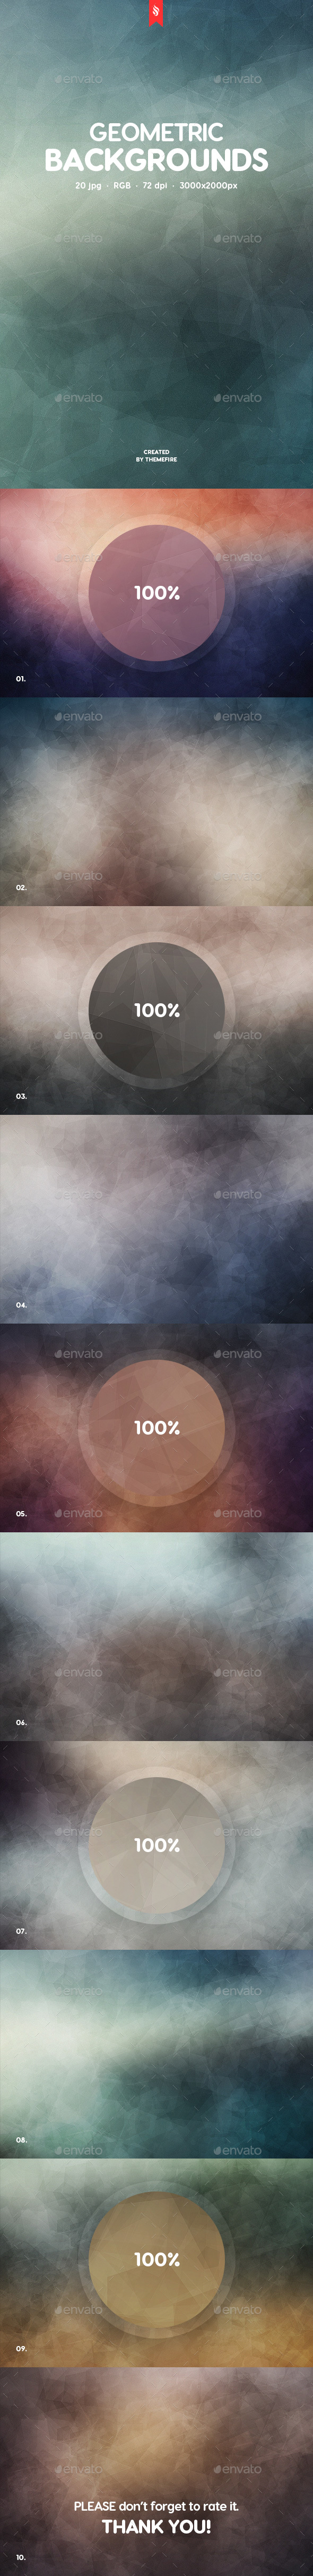 10 Geometric Abstract Backgrounds